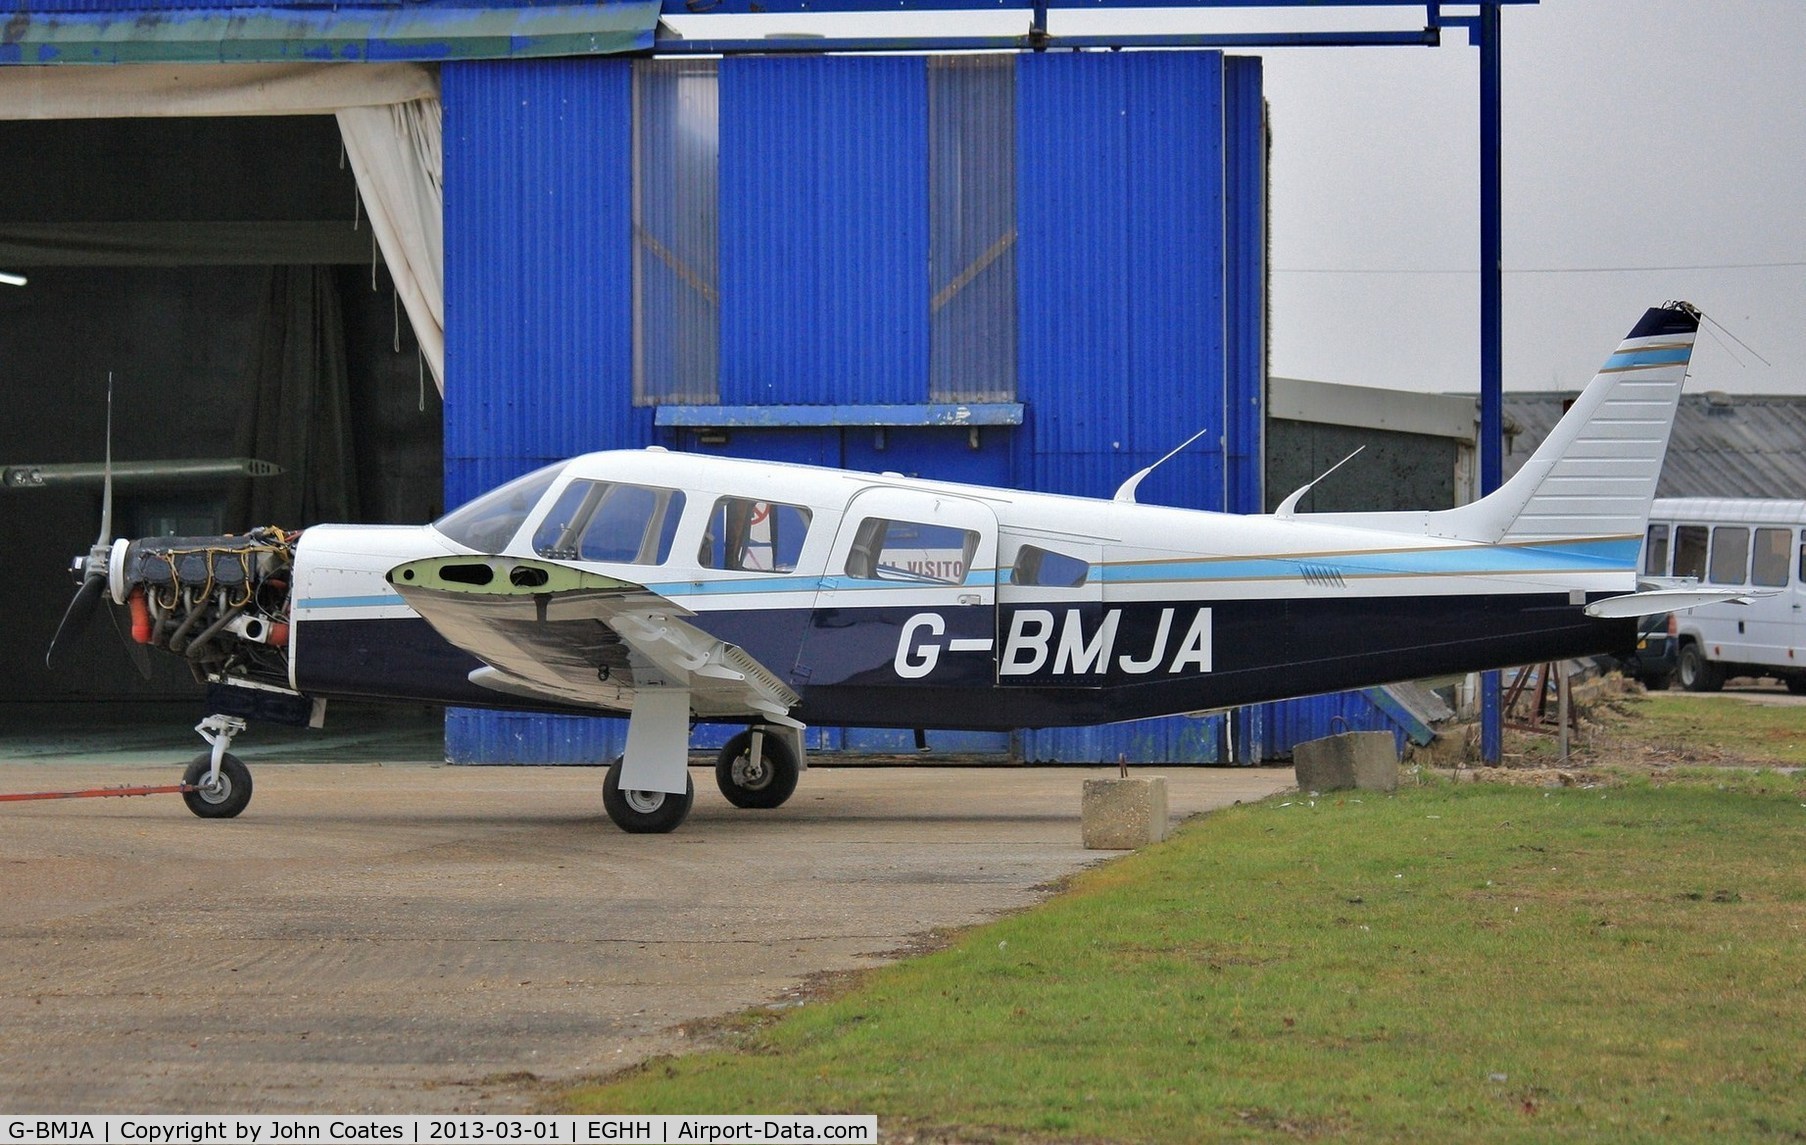 G-BMJA, 1981 Piper PA-32R-301 Saratoga SP C/N 32R-8113019, Freshly painted just exited the paintshop